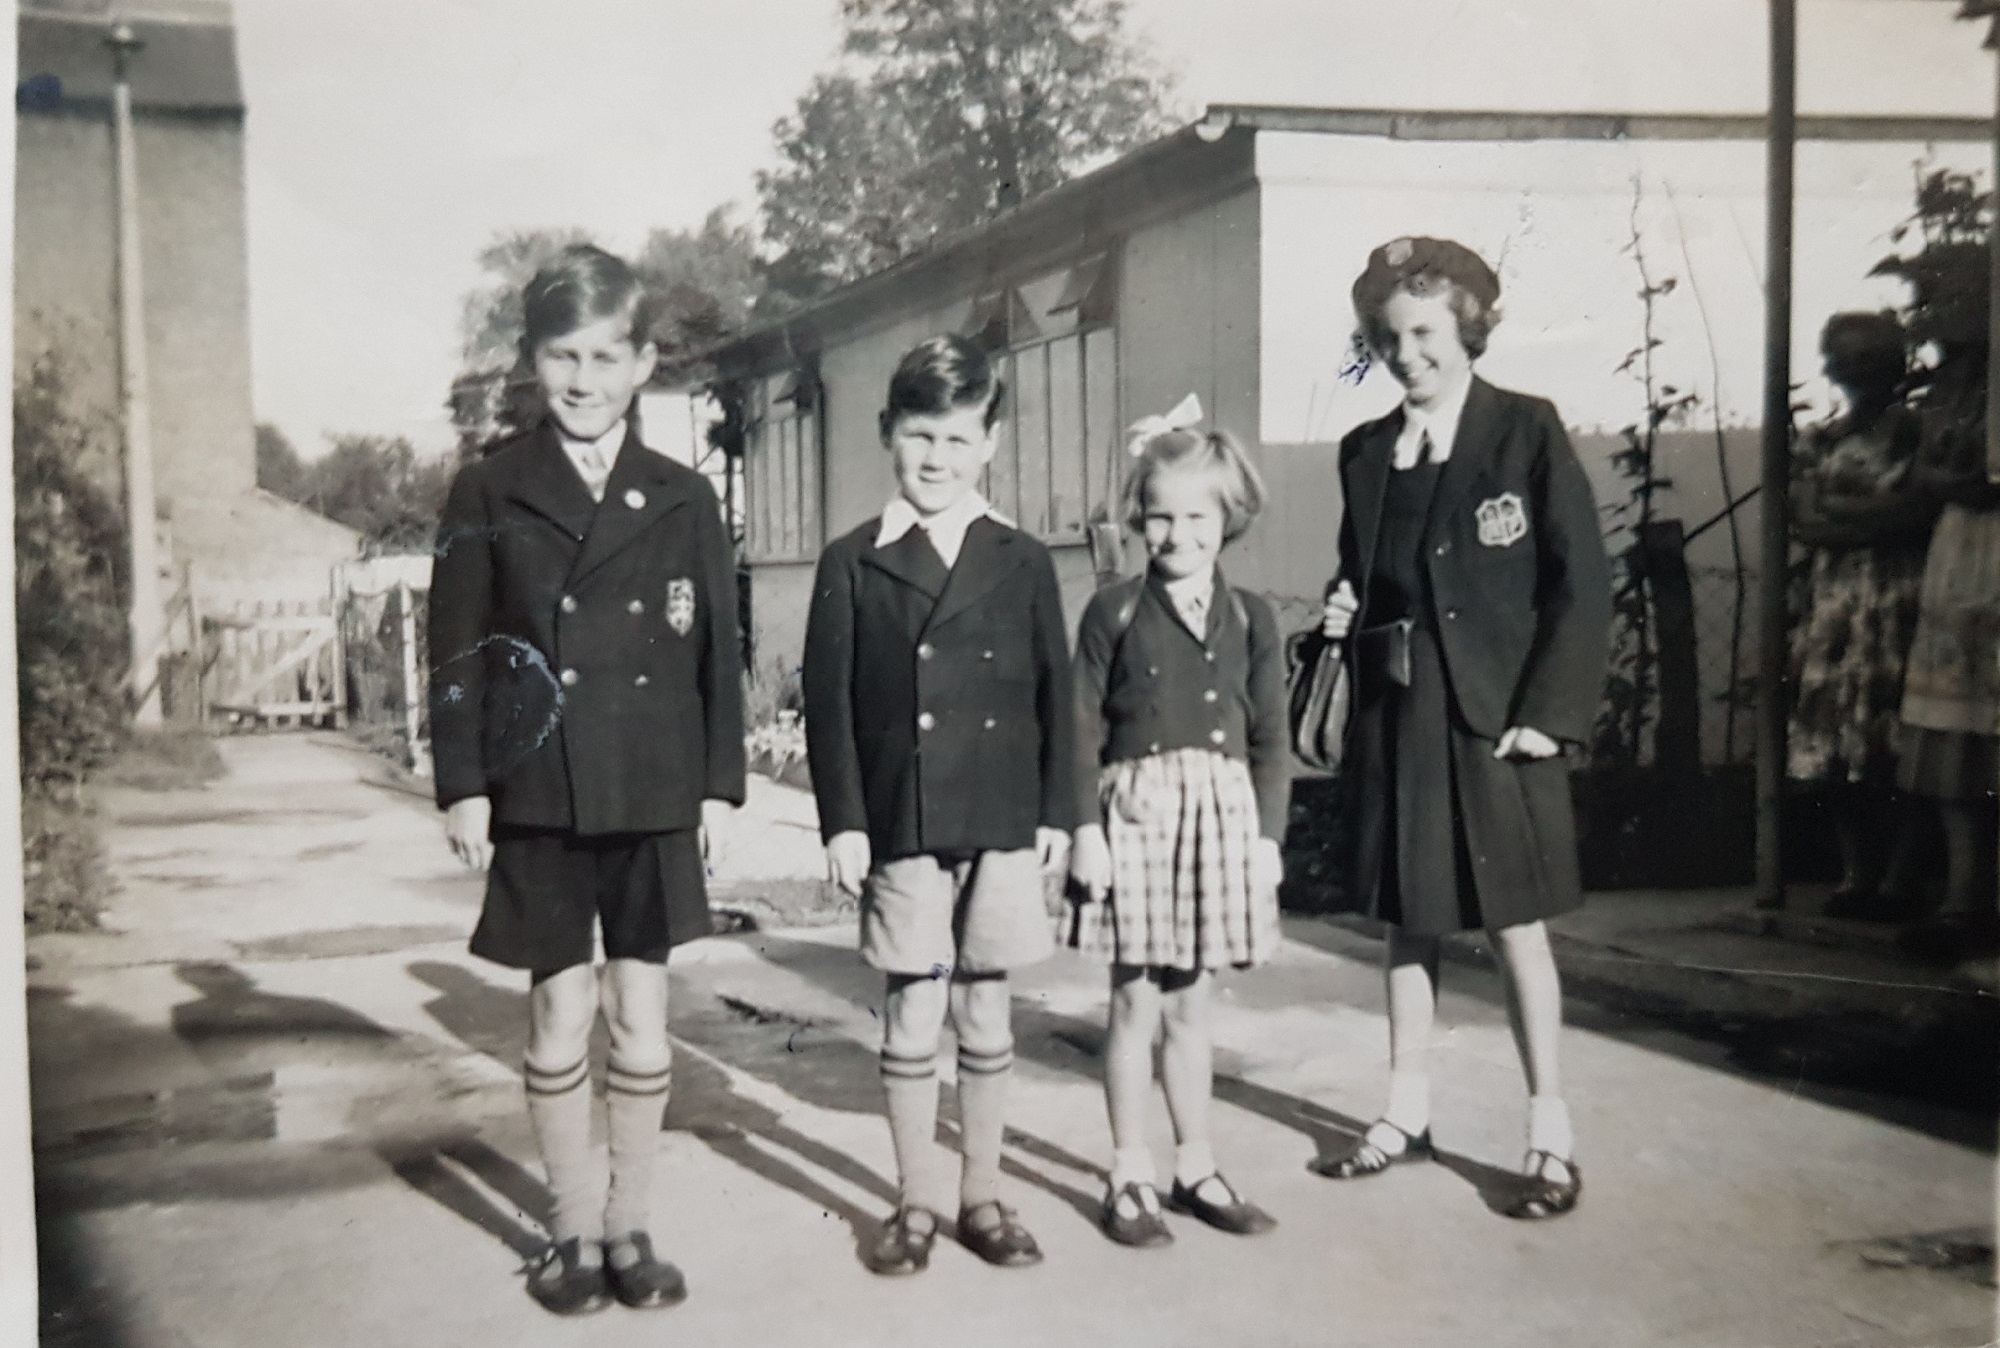 Allen, Brian and Sylvia and Christine Pearce, off to school circa 1955. Chelverton Road, Putney